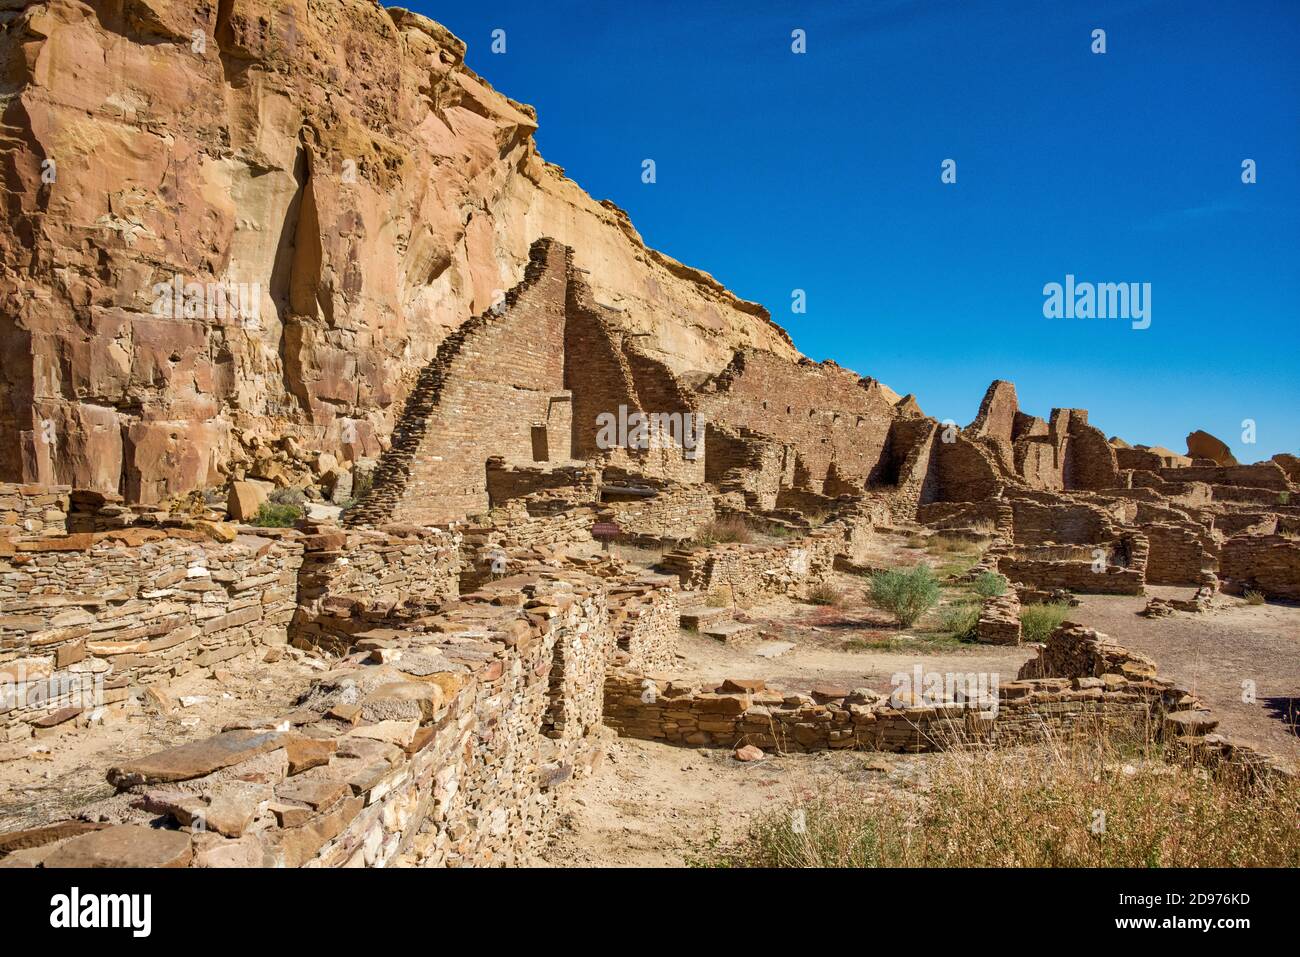 Pueblo Bonito is an ancestral Puebloan great house located in Chaco Canyon Cultral Park, New Mexico. Stock Photo